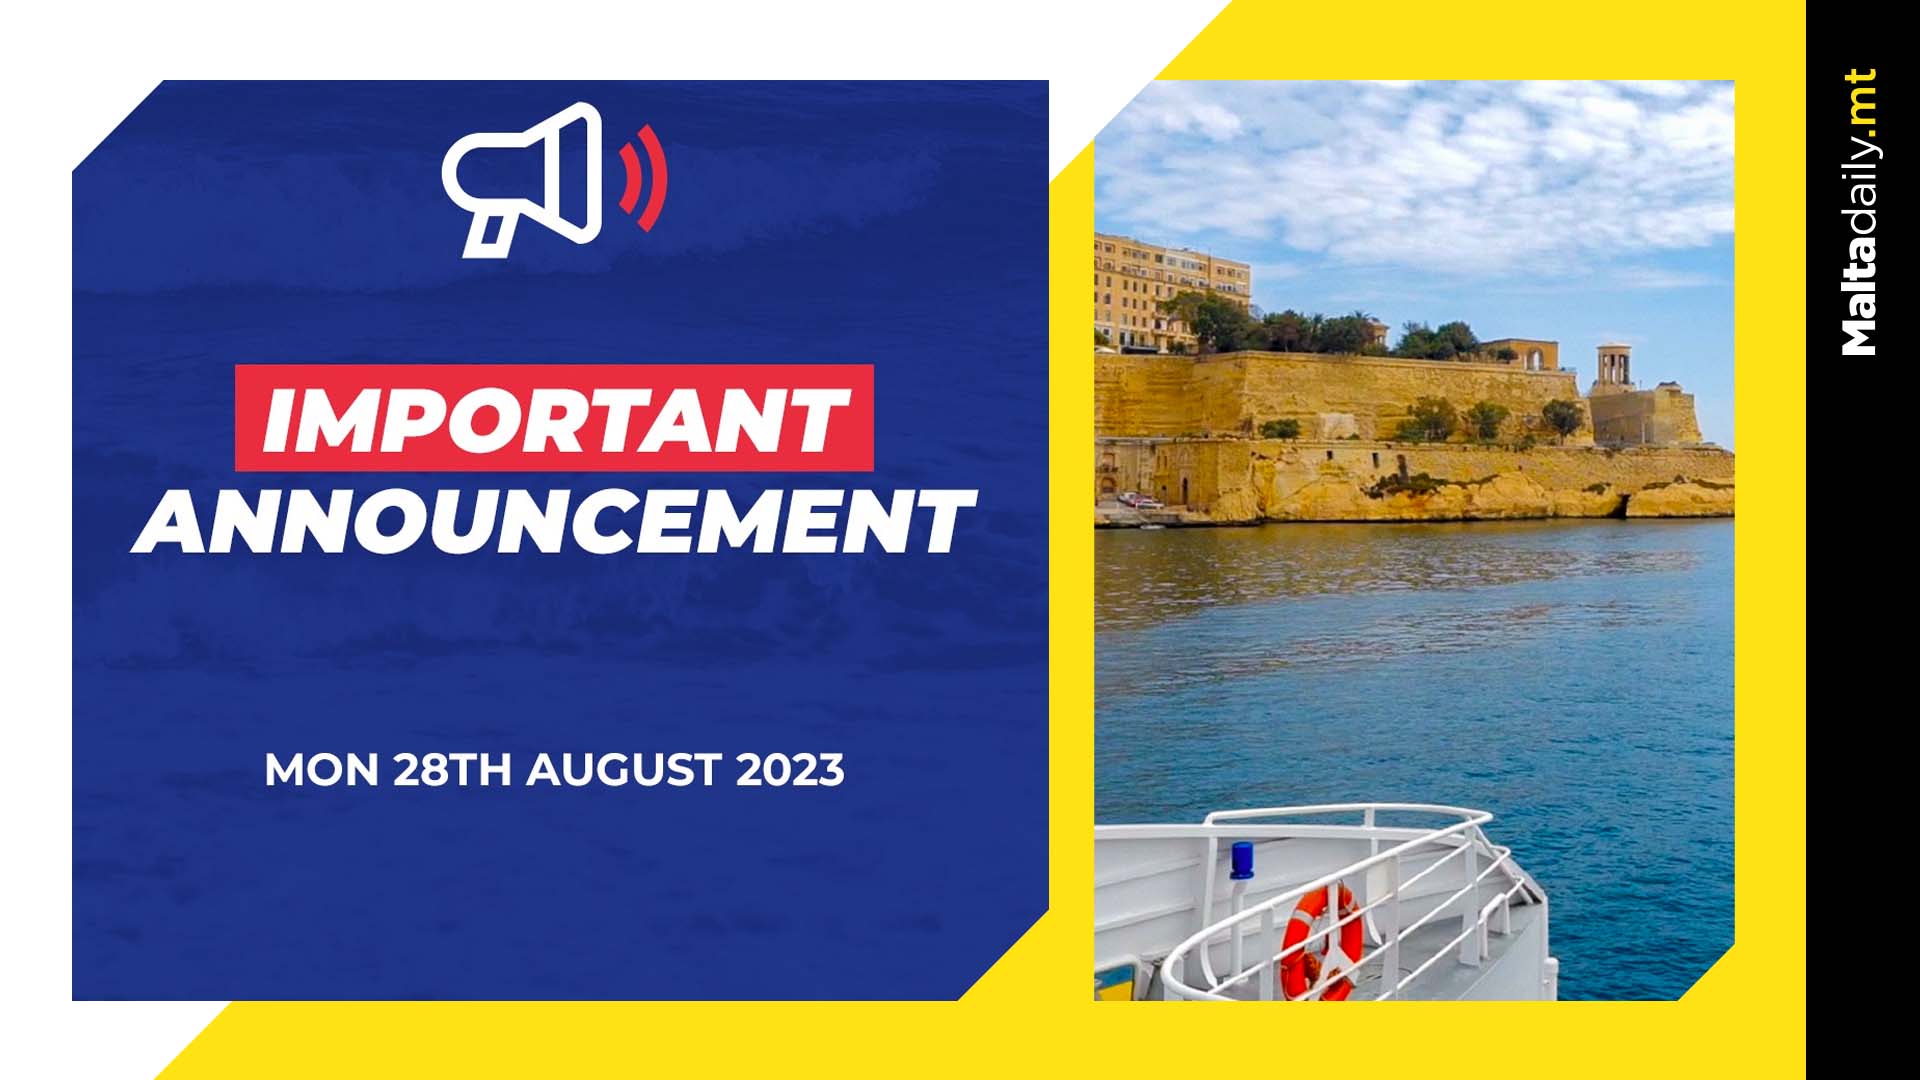 Gozo Highspeed Cancel Trips Due To Sea Conditions